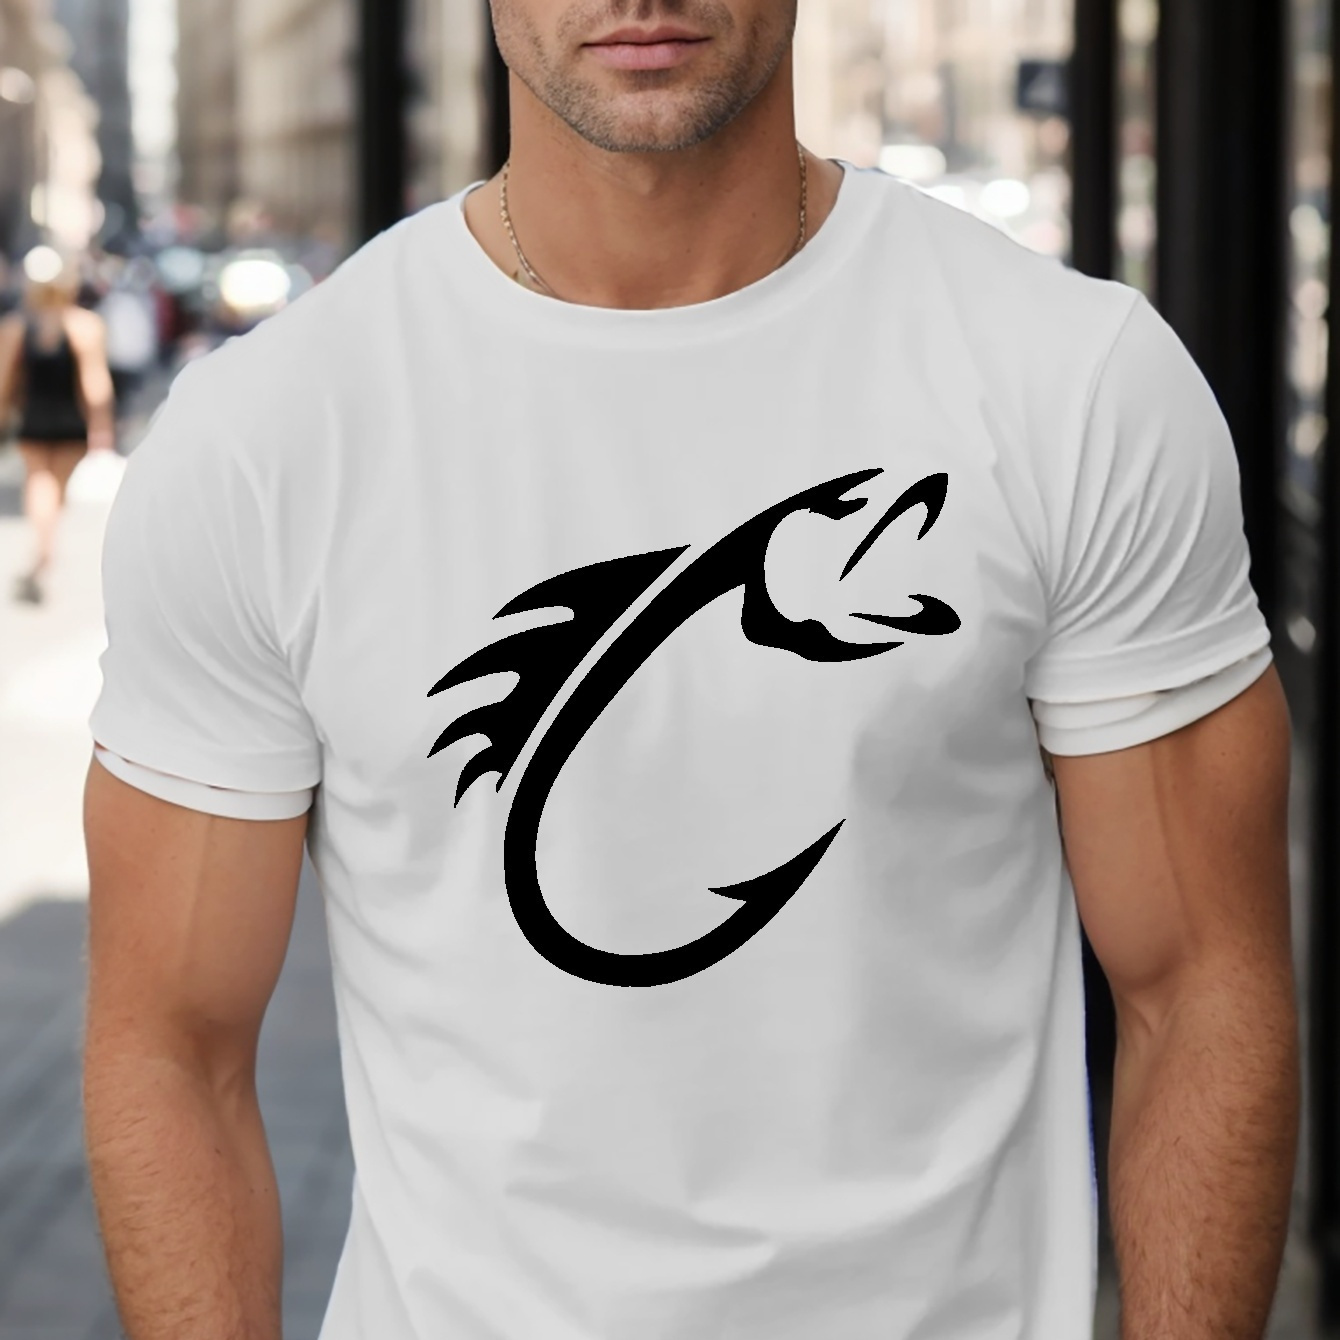 

1 Pc, 100% Cotton T-shirt, Fish Hook Print Tees For Men, Casual Quick Drying Breathable T-shirt, Short Sleeve T-shirt For Summer